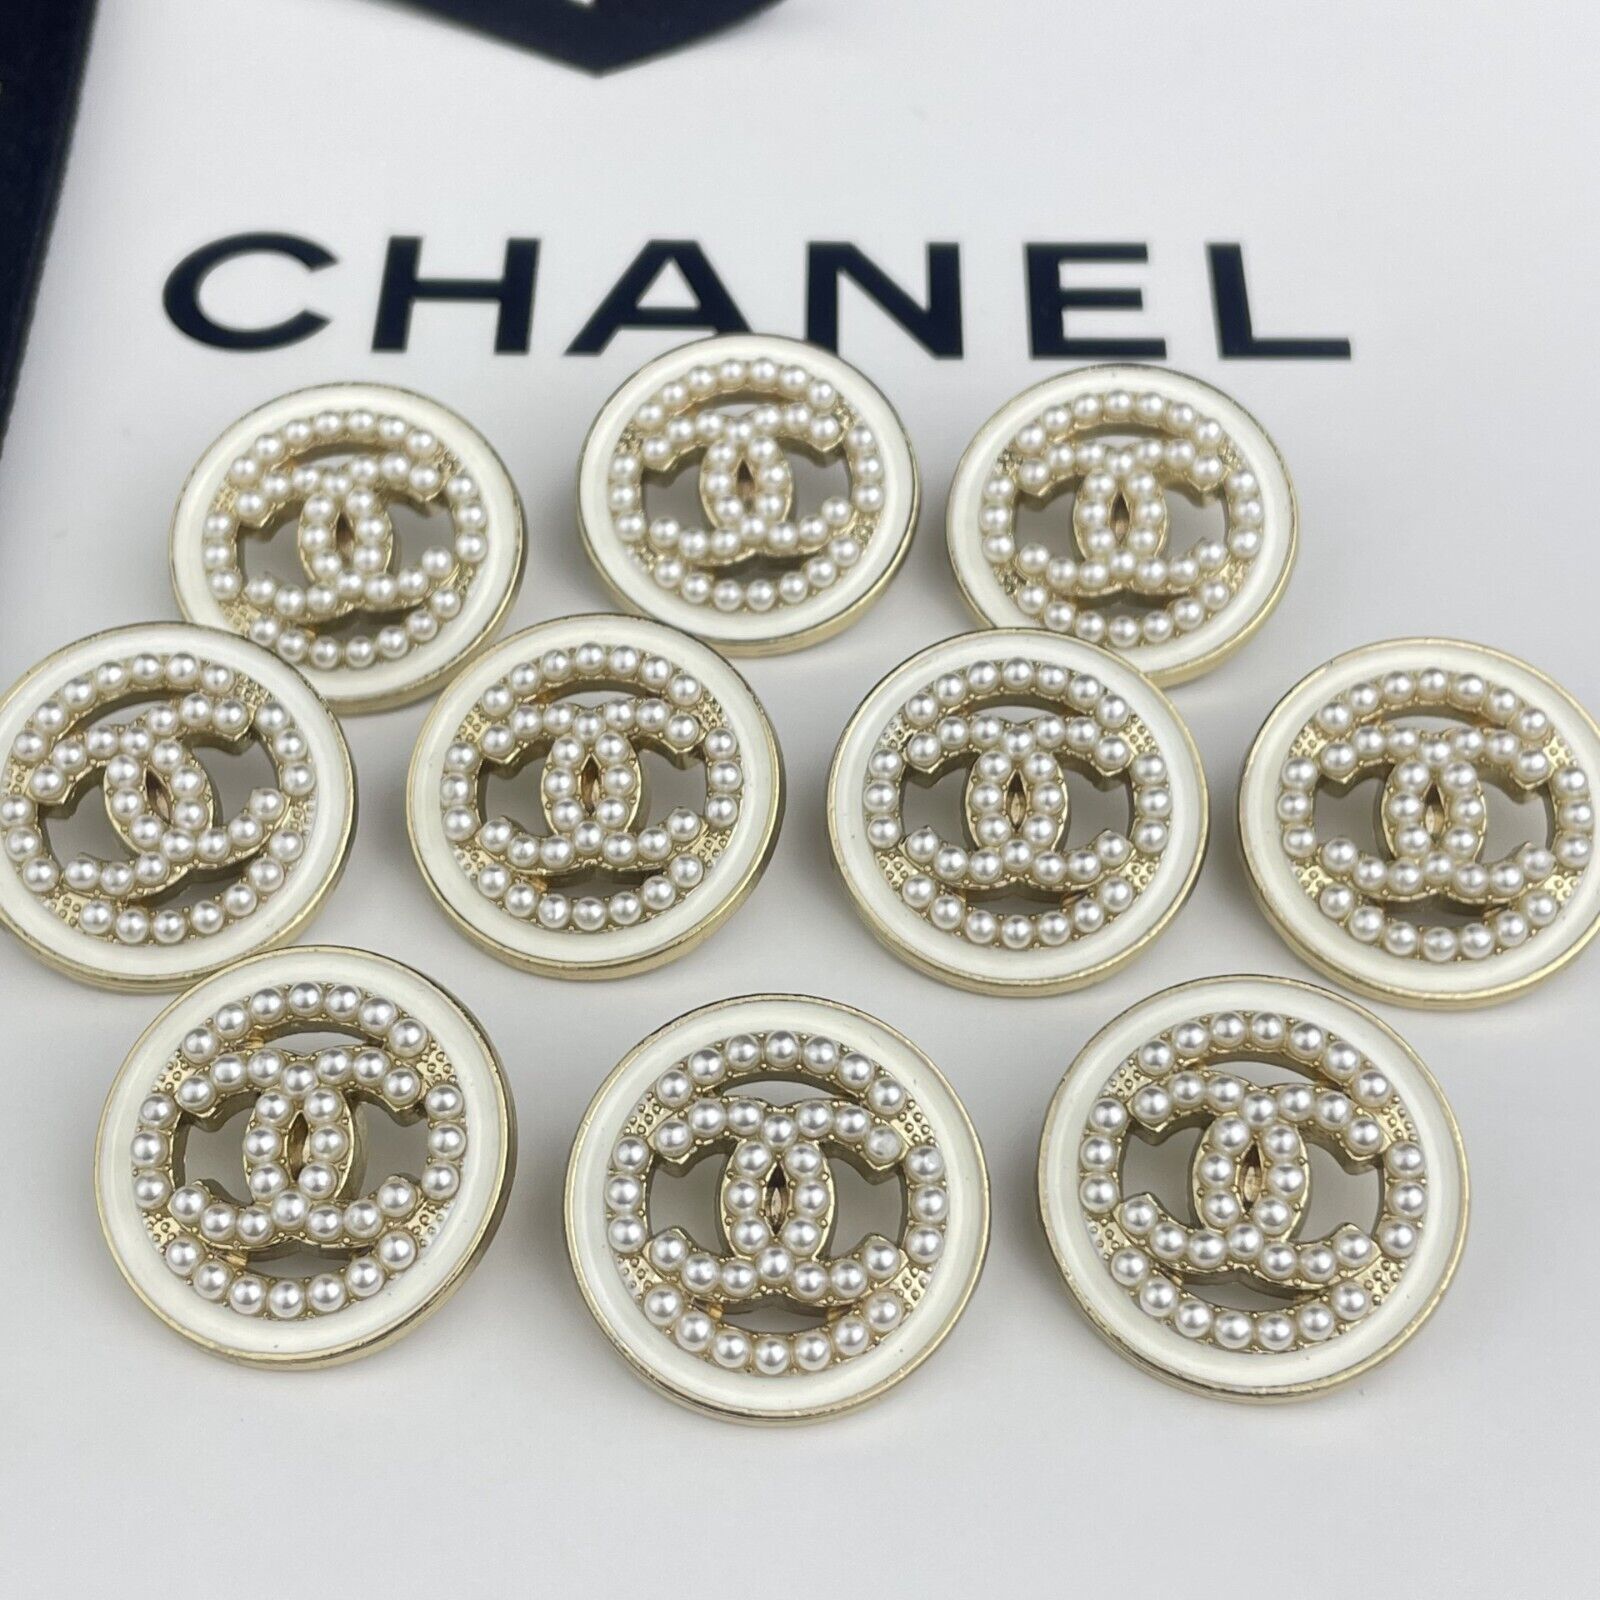 10 CHANEL BUTTONS GOLD WHITE PEARL CC LOGO METAL 23MM VINTAGE